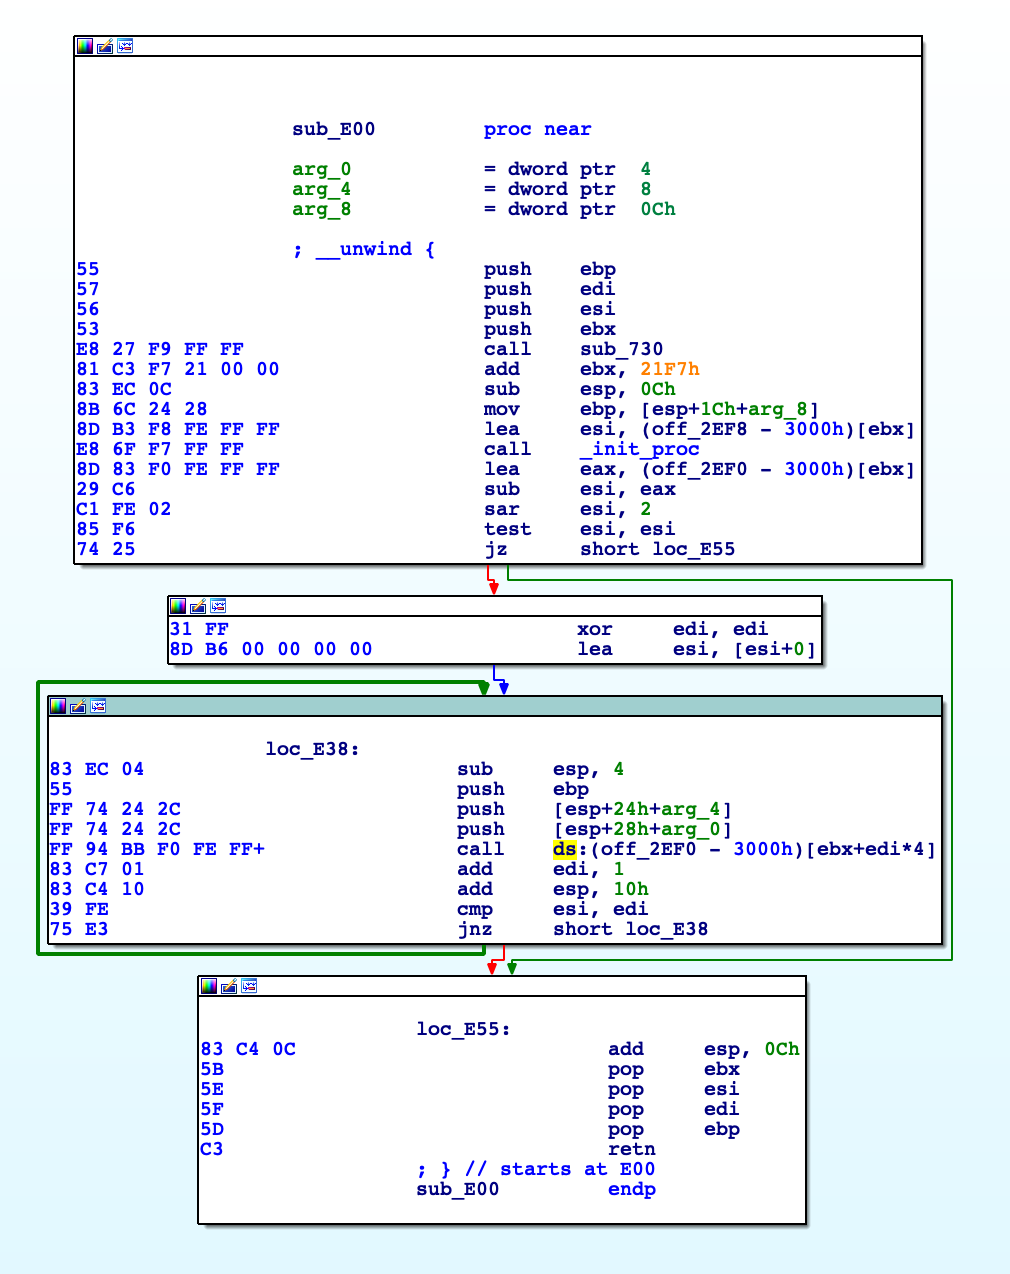 An extensive step by step reverse engineering analysis of a Linux CTF binary